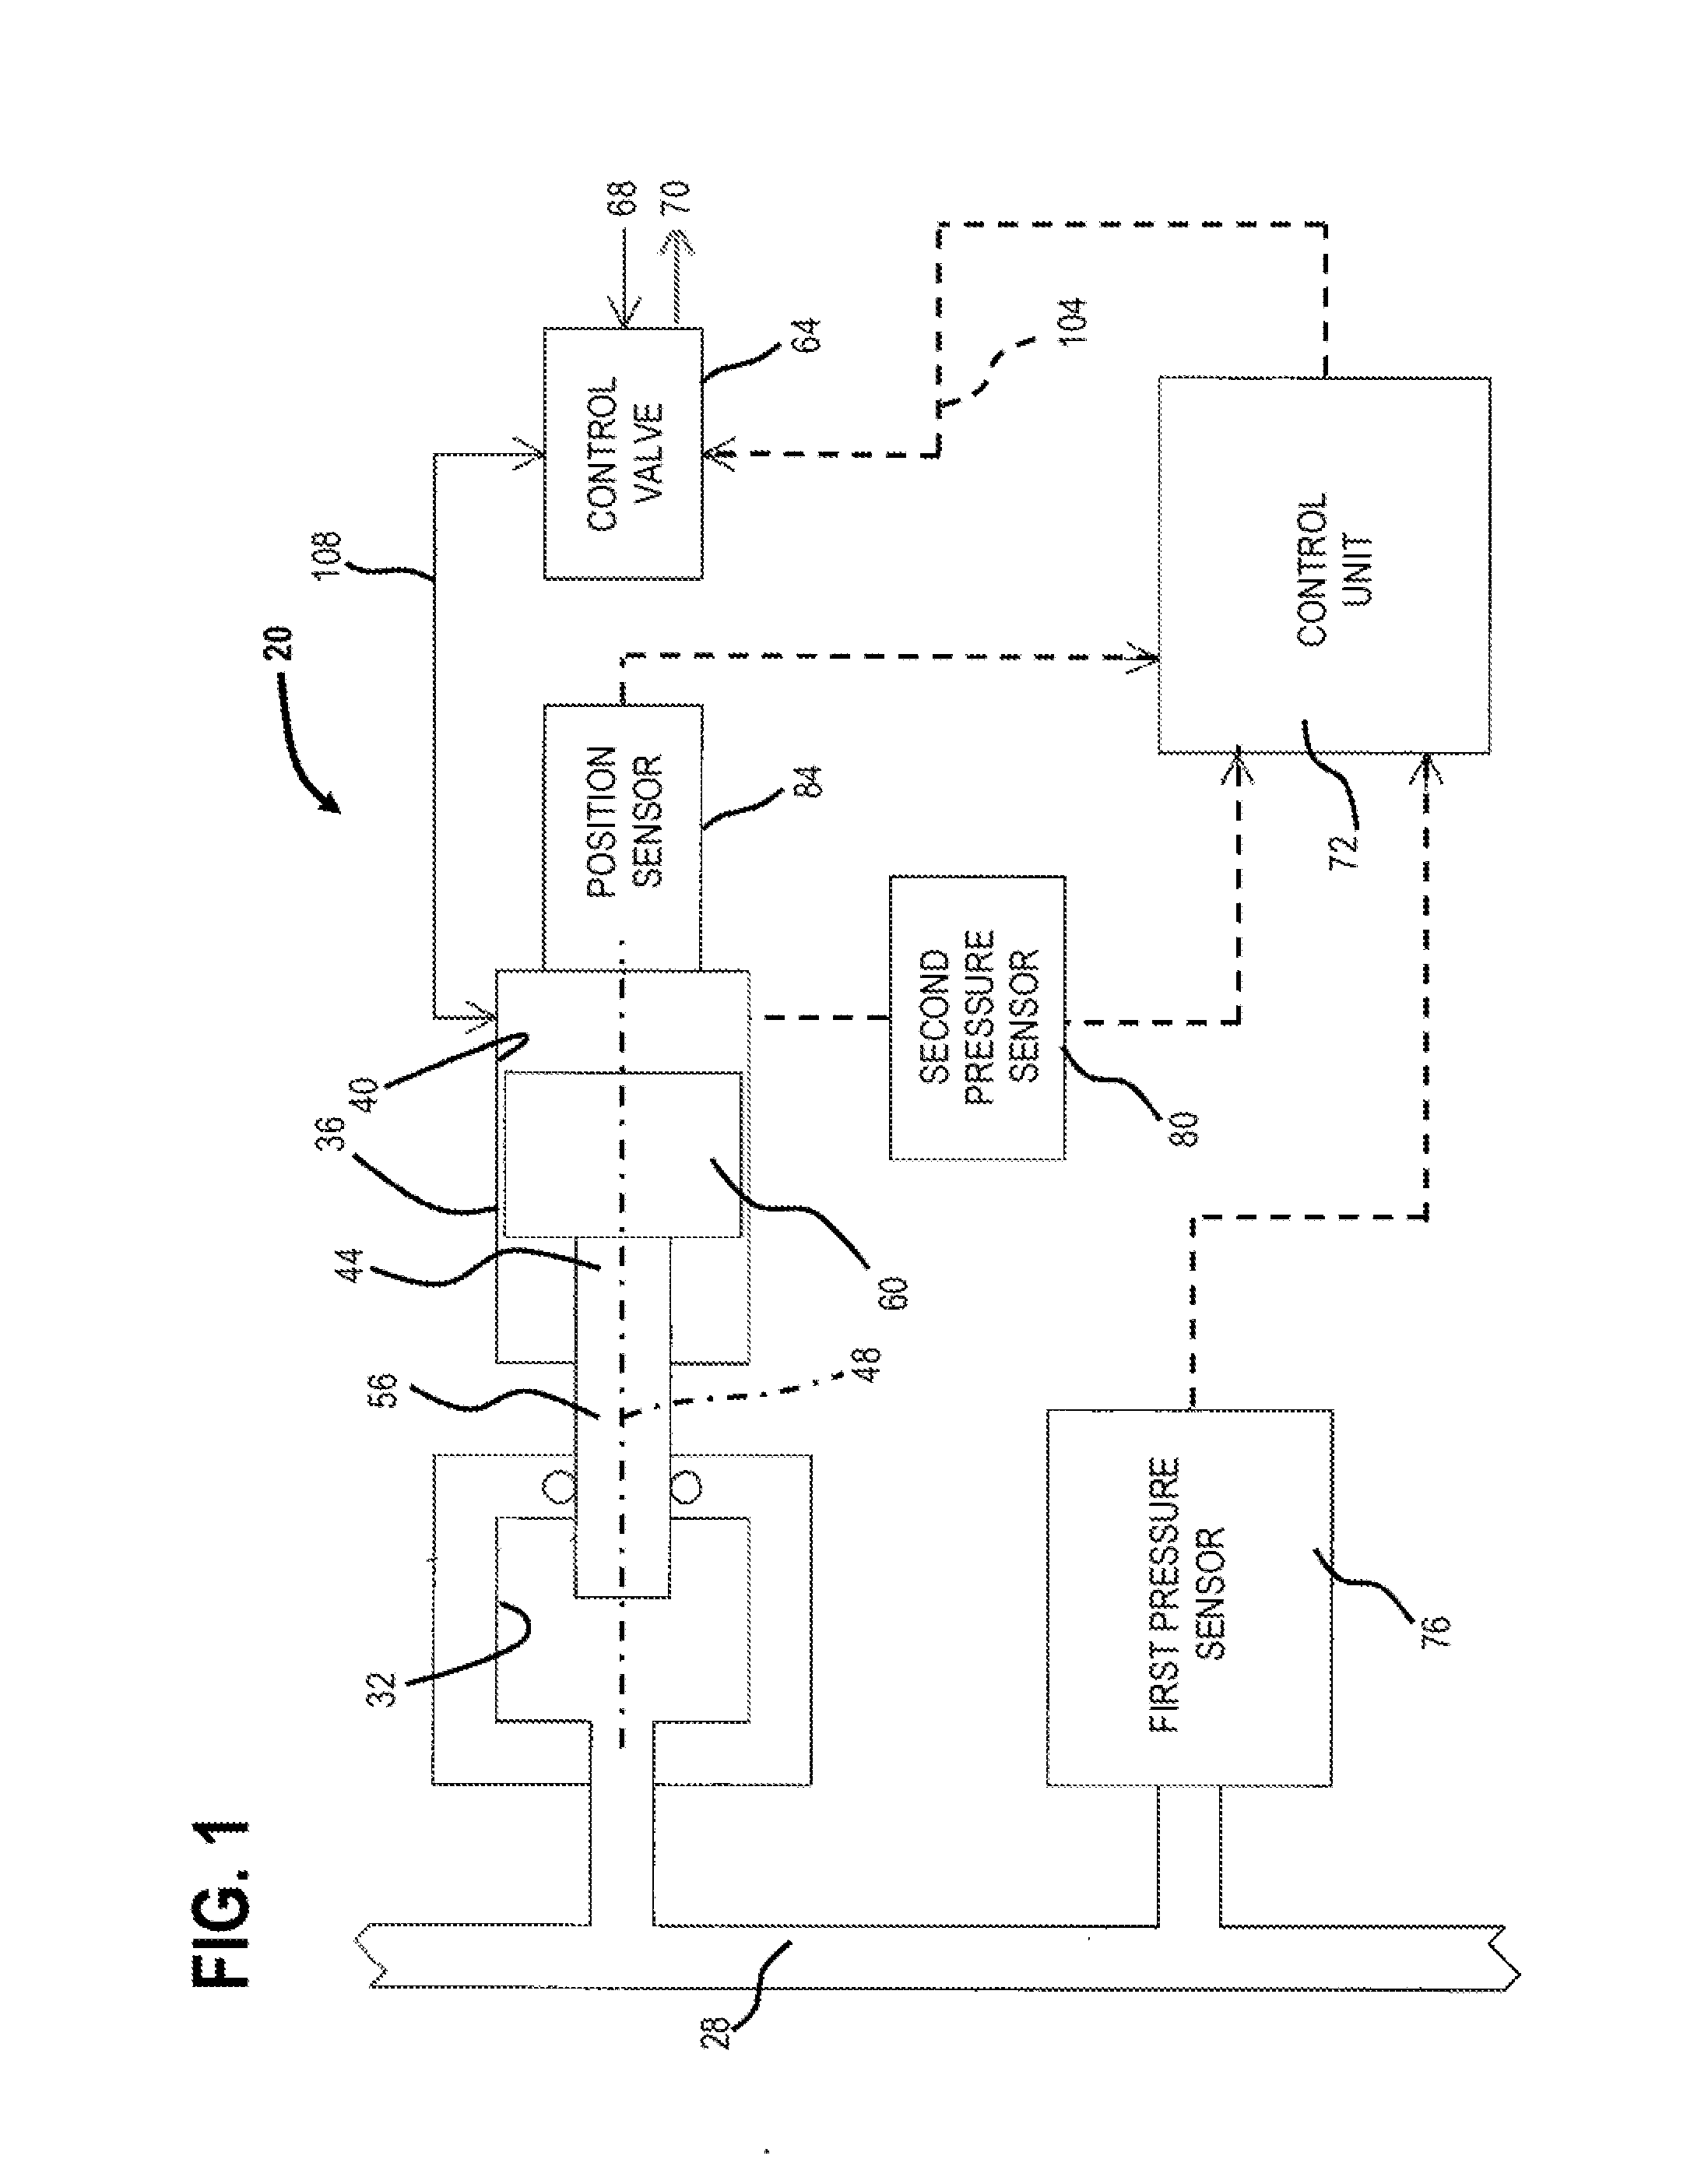 Method of dampening pressure pulsations in a working fluid within a conduit